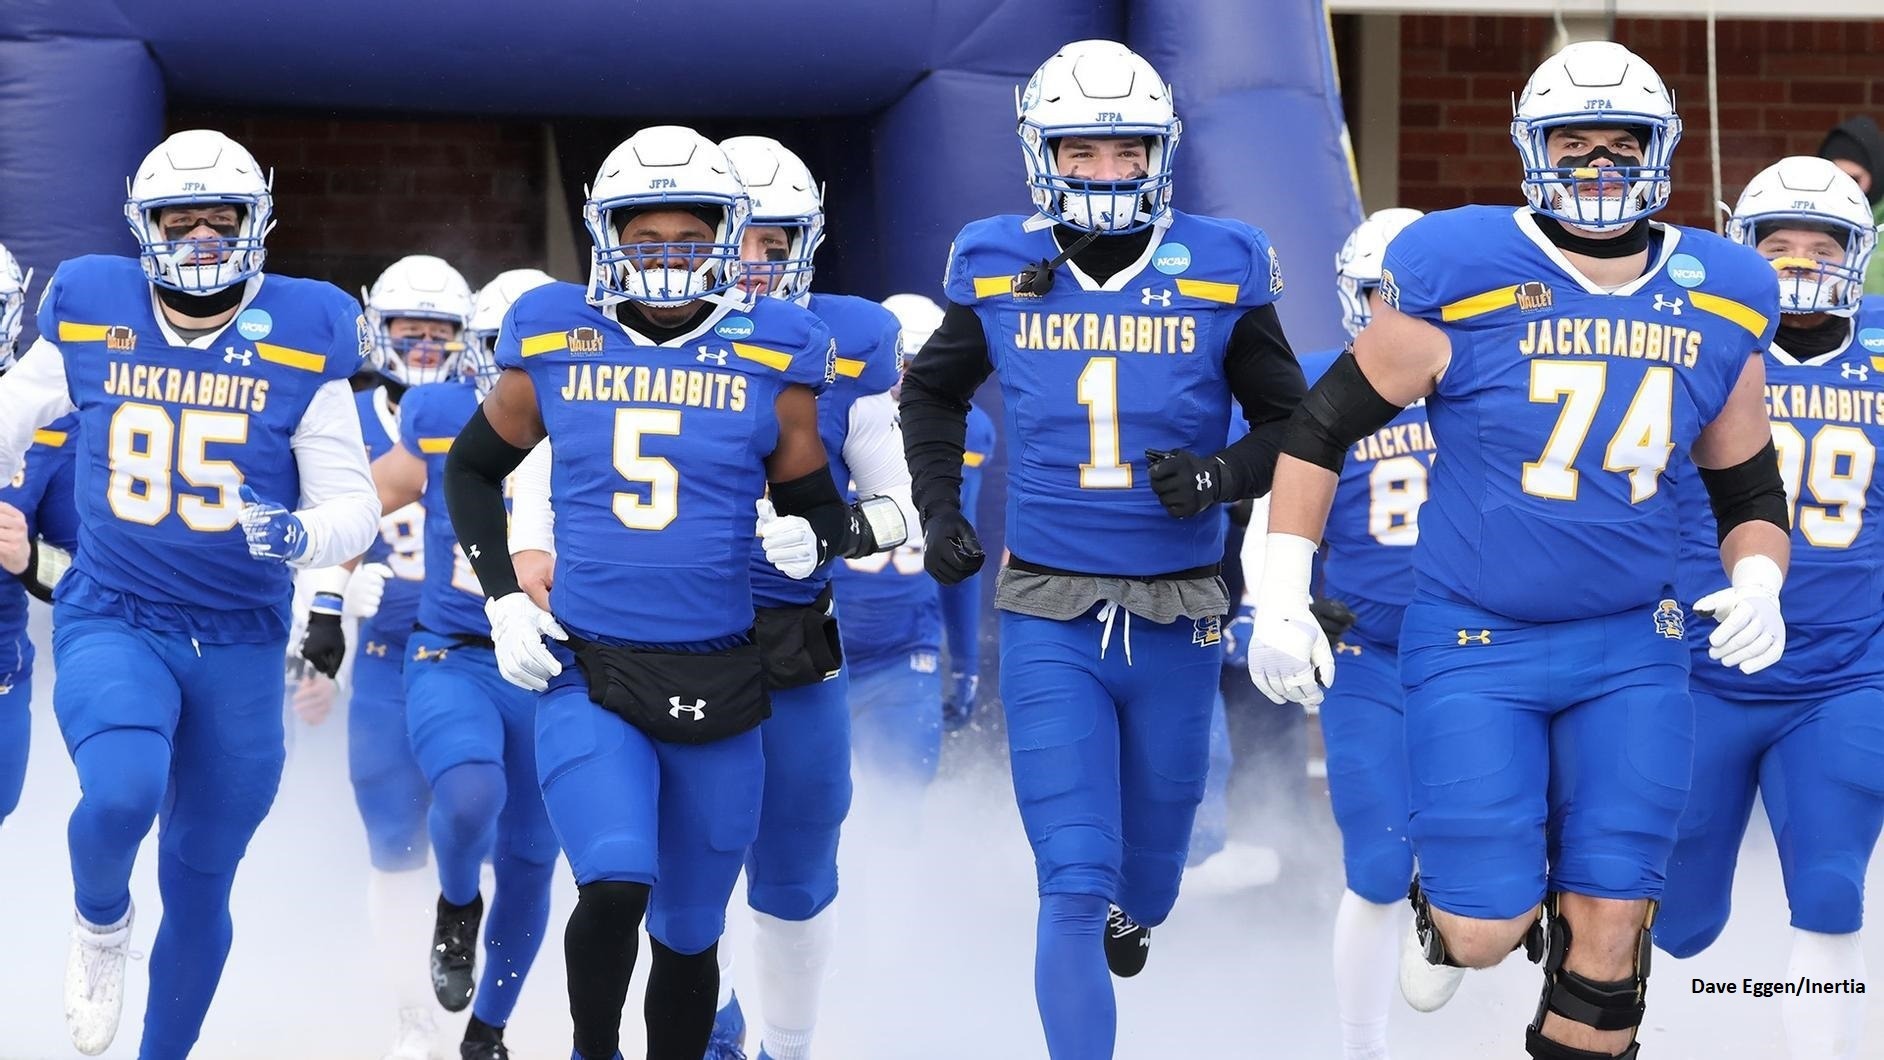 Will Jackrabbits go Back-to-Back? Predictions for the 2023 FCS Season